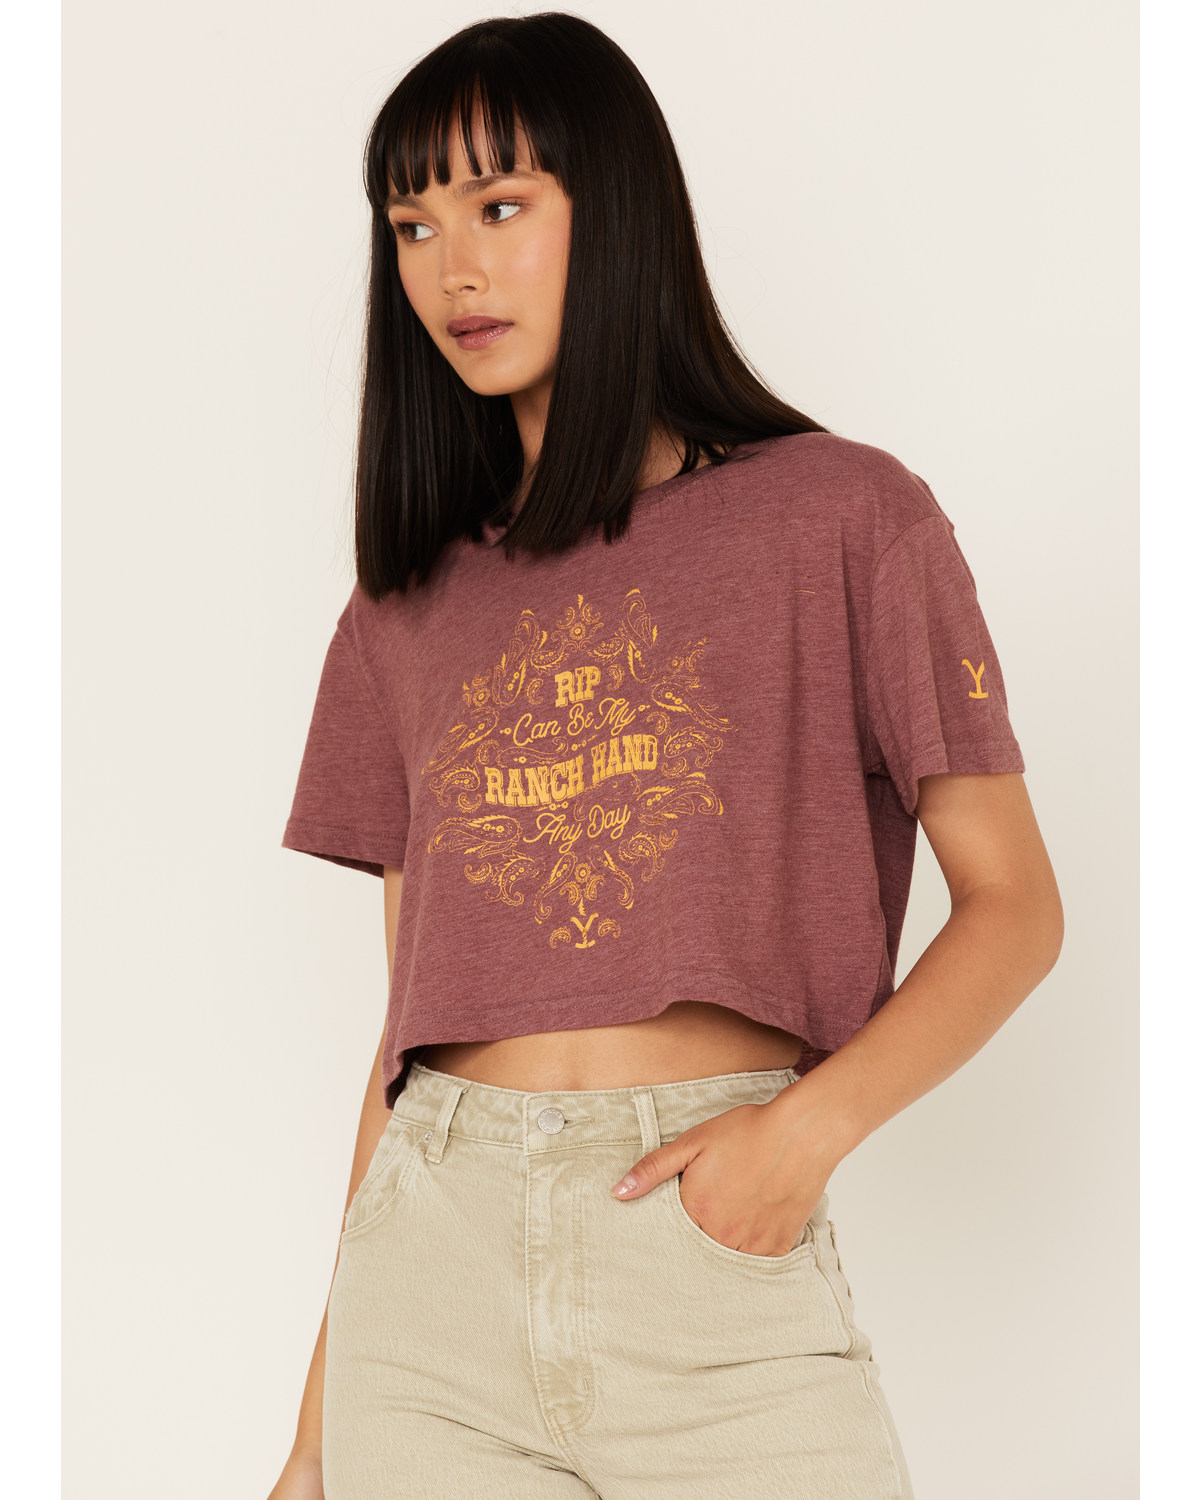 Wrangler x Yellowstone Women's RIP Can Be My Ranch Hand Cropped Graphic Tee